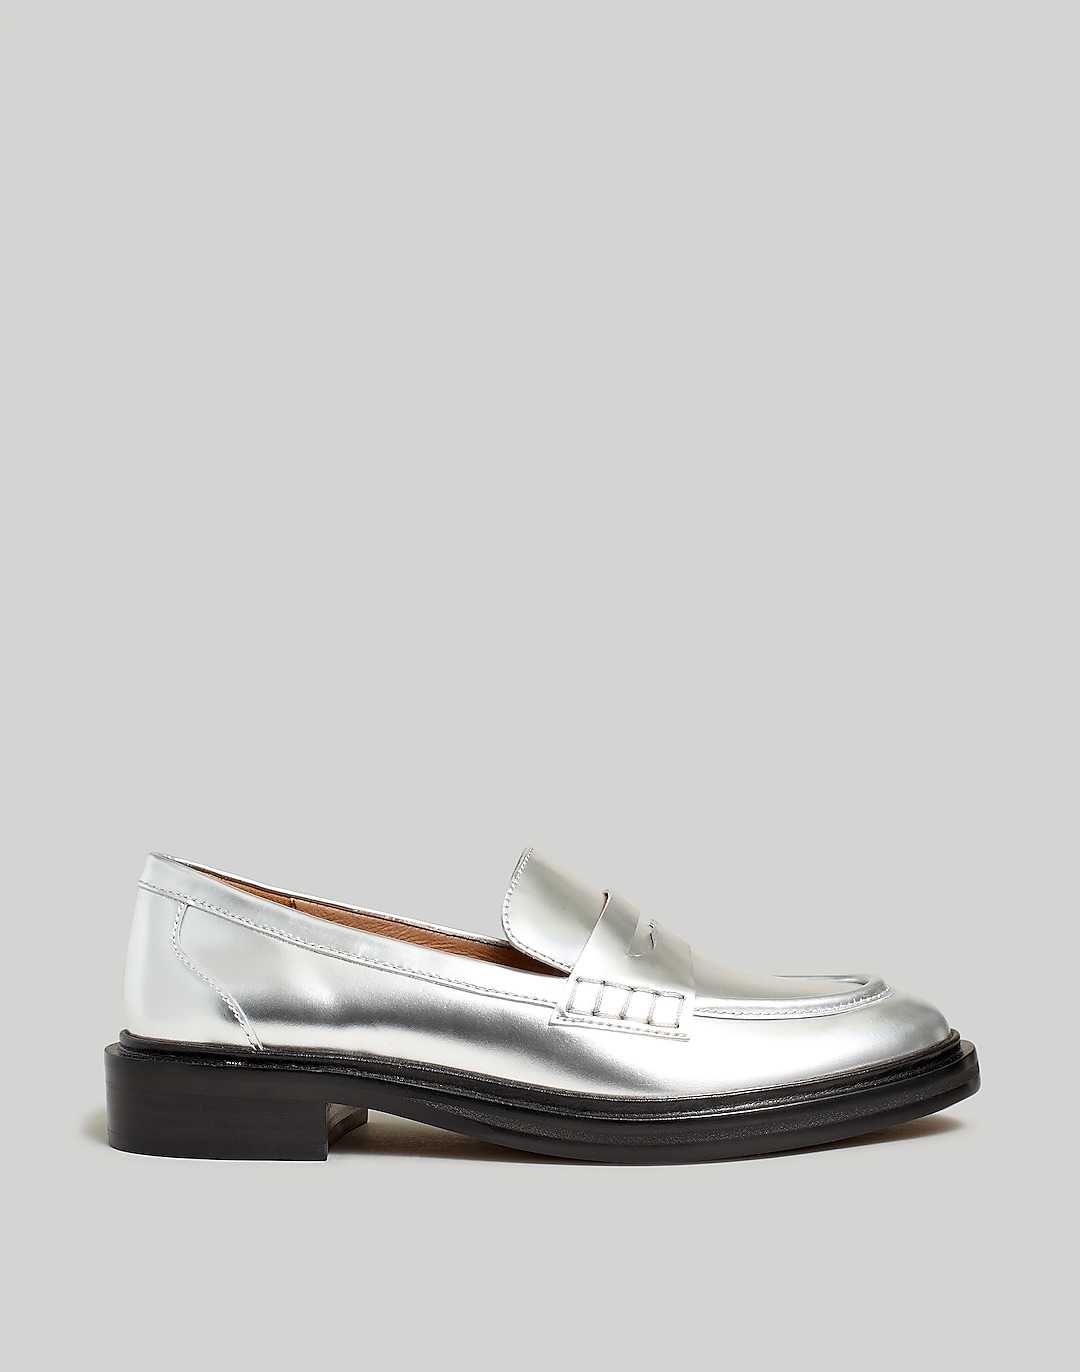 The Vernon Loafer in Specchio Leather | Madewell